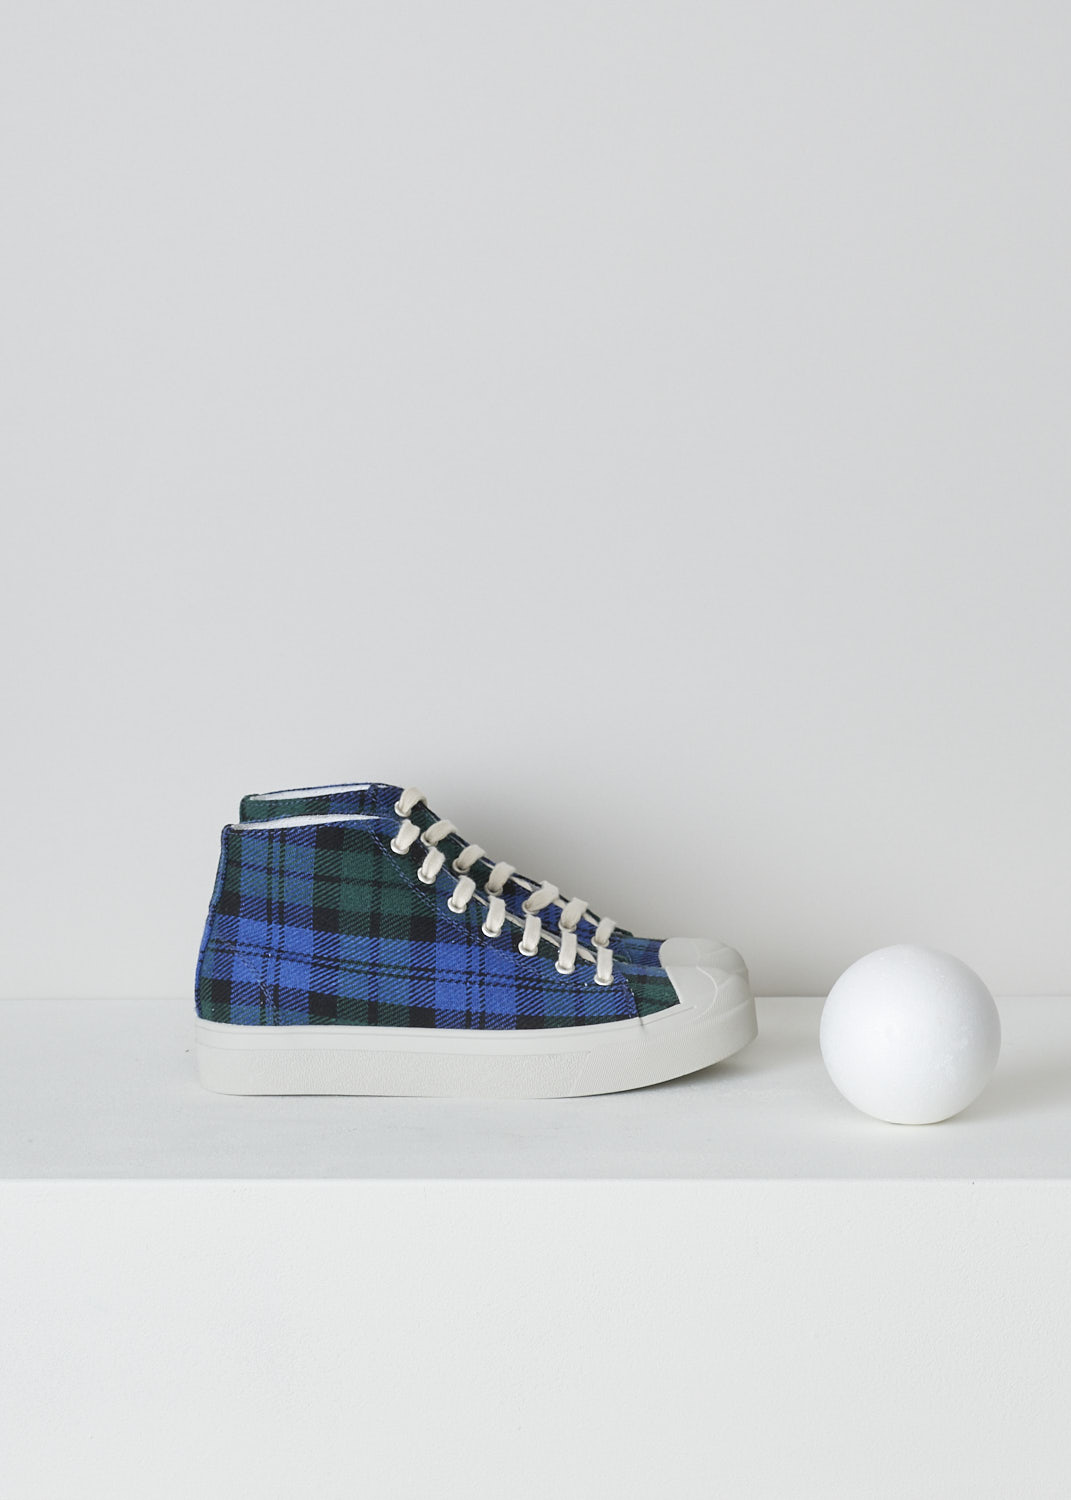 SOFIE Dâ€™HOORE, BLUE AND GREEN TARTAN SNEAKERS, FOSTER_WSCOT_TARTAN_5, Green, Blue, Print, Side, These high top sneakers with blue and green tartan print feature front lace-up fastening with white laces. These sneakers have a round toe with a white rubber toe cap. These shoes have white rubber soles.
  
